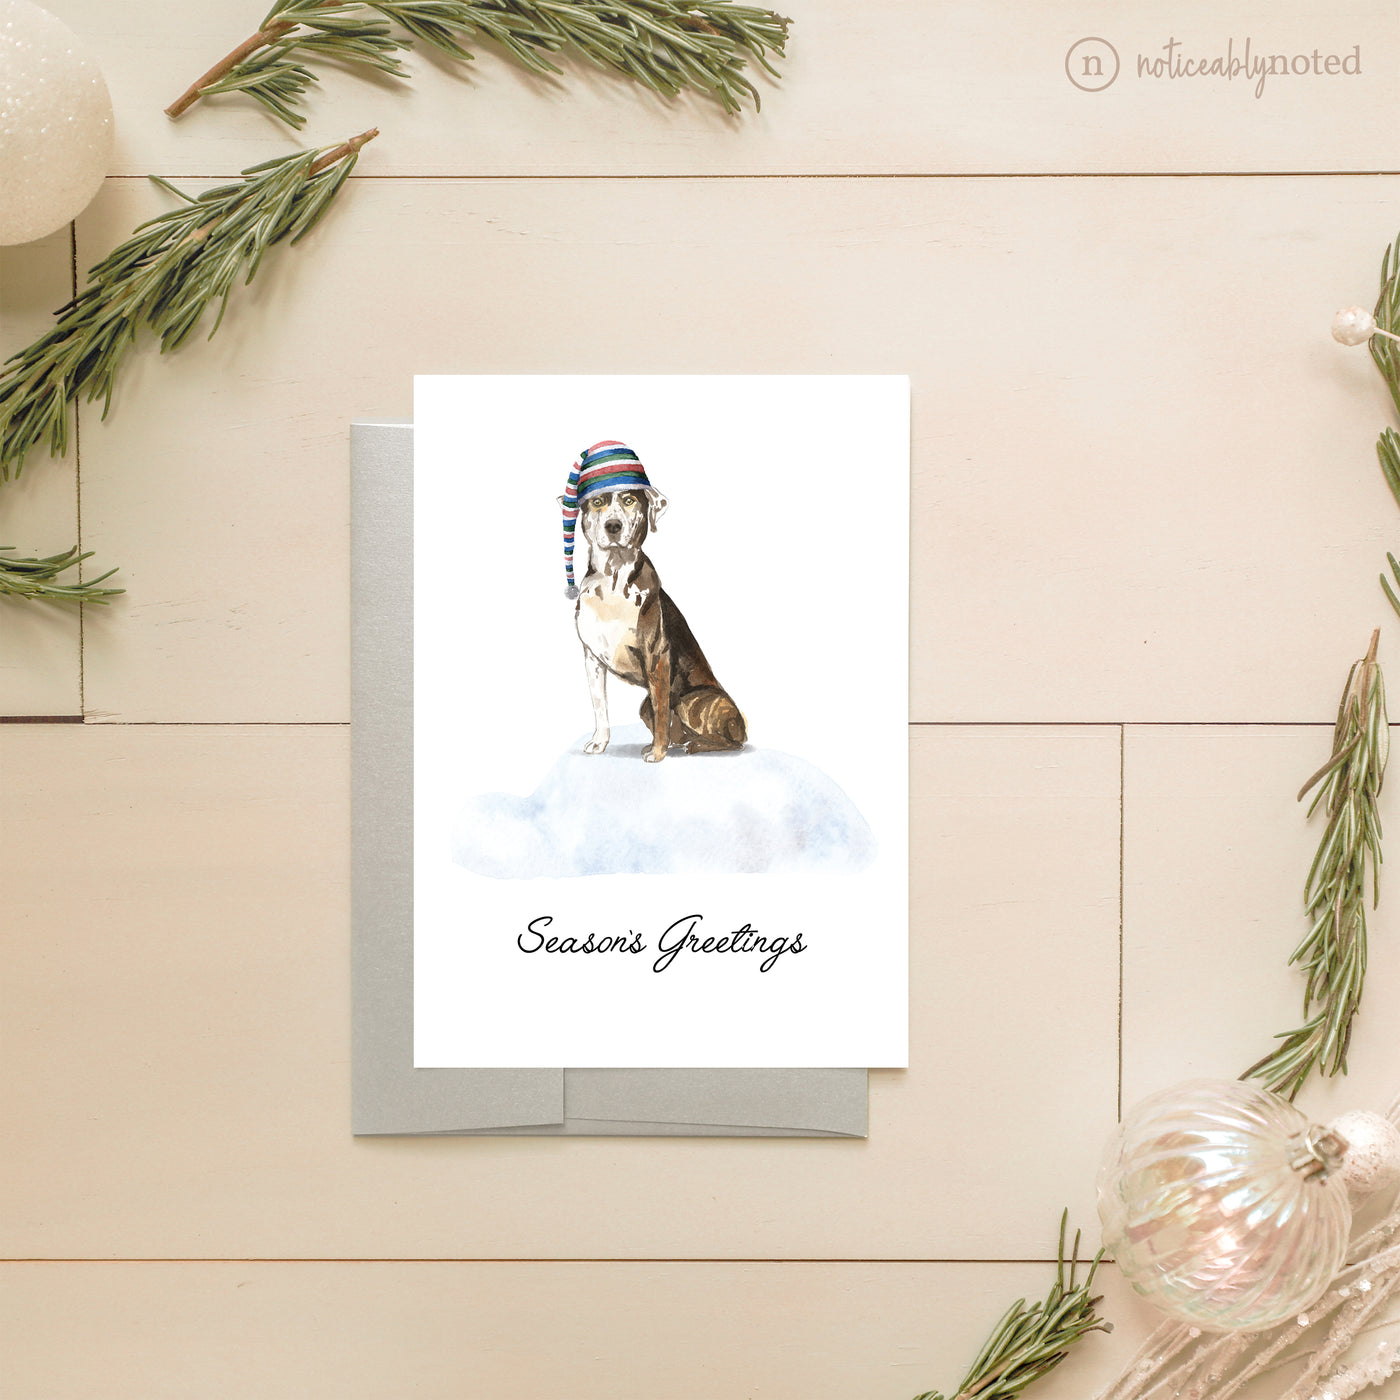 Catahoula Leopard Dog Holiday Greeting Cards | Noticeably Noted